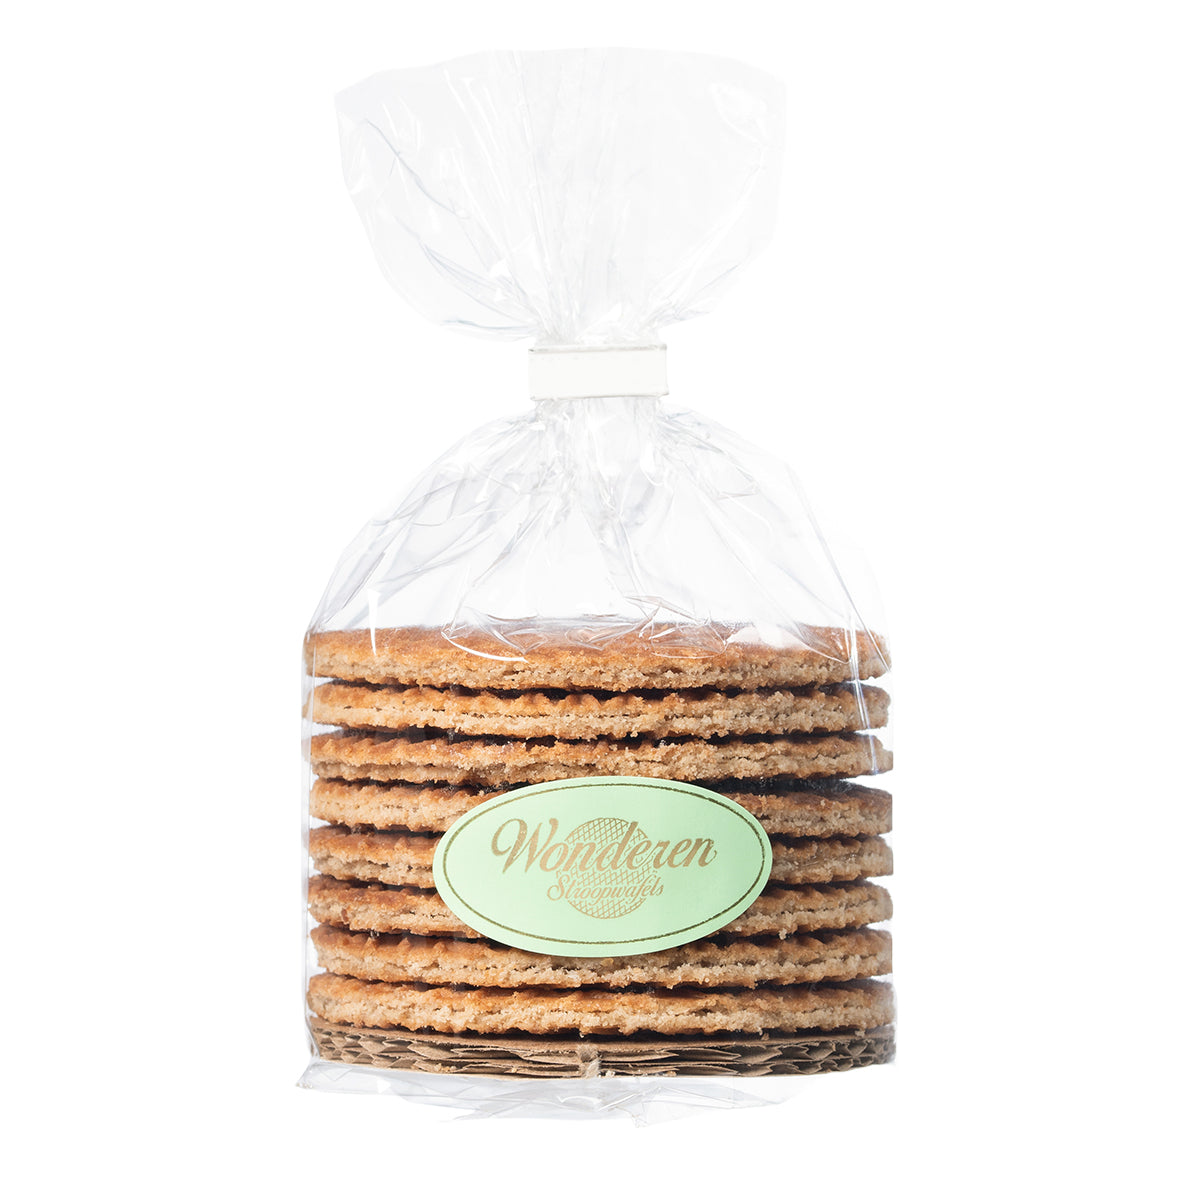 A stack of Wonderen Stroopwafels Gift Box in a plastic bag on a white background.